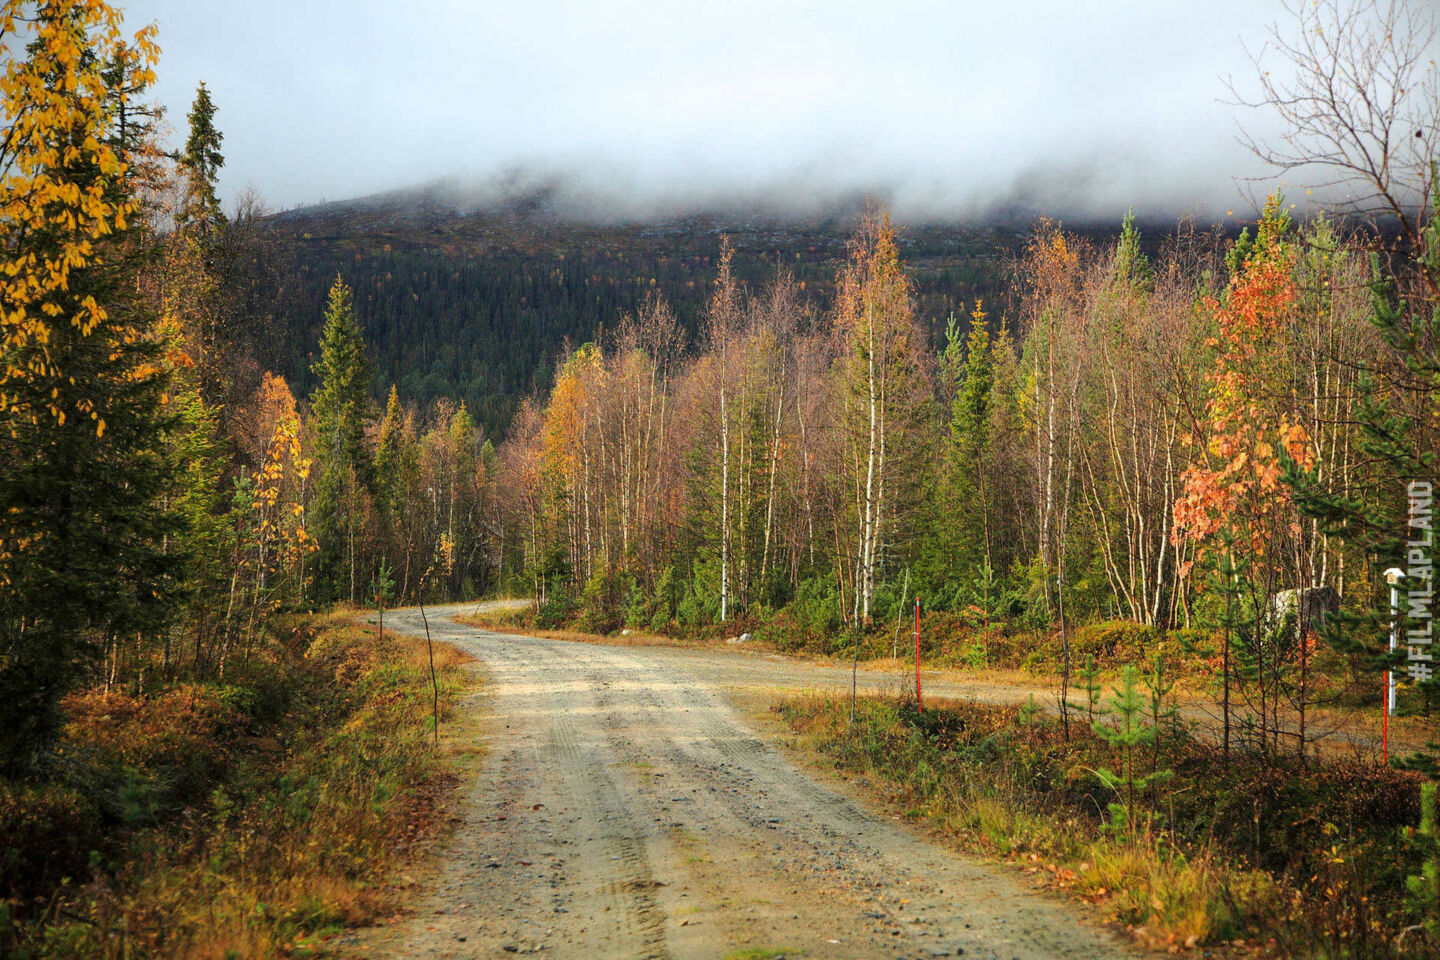 Autumn colors in Enontekiö, a feature of filming in Finnish Lapland locations